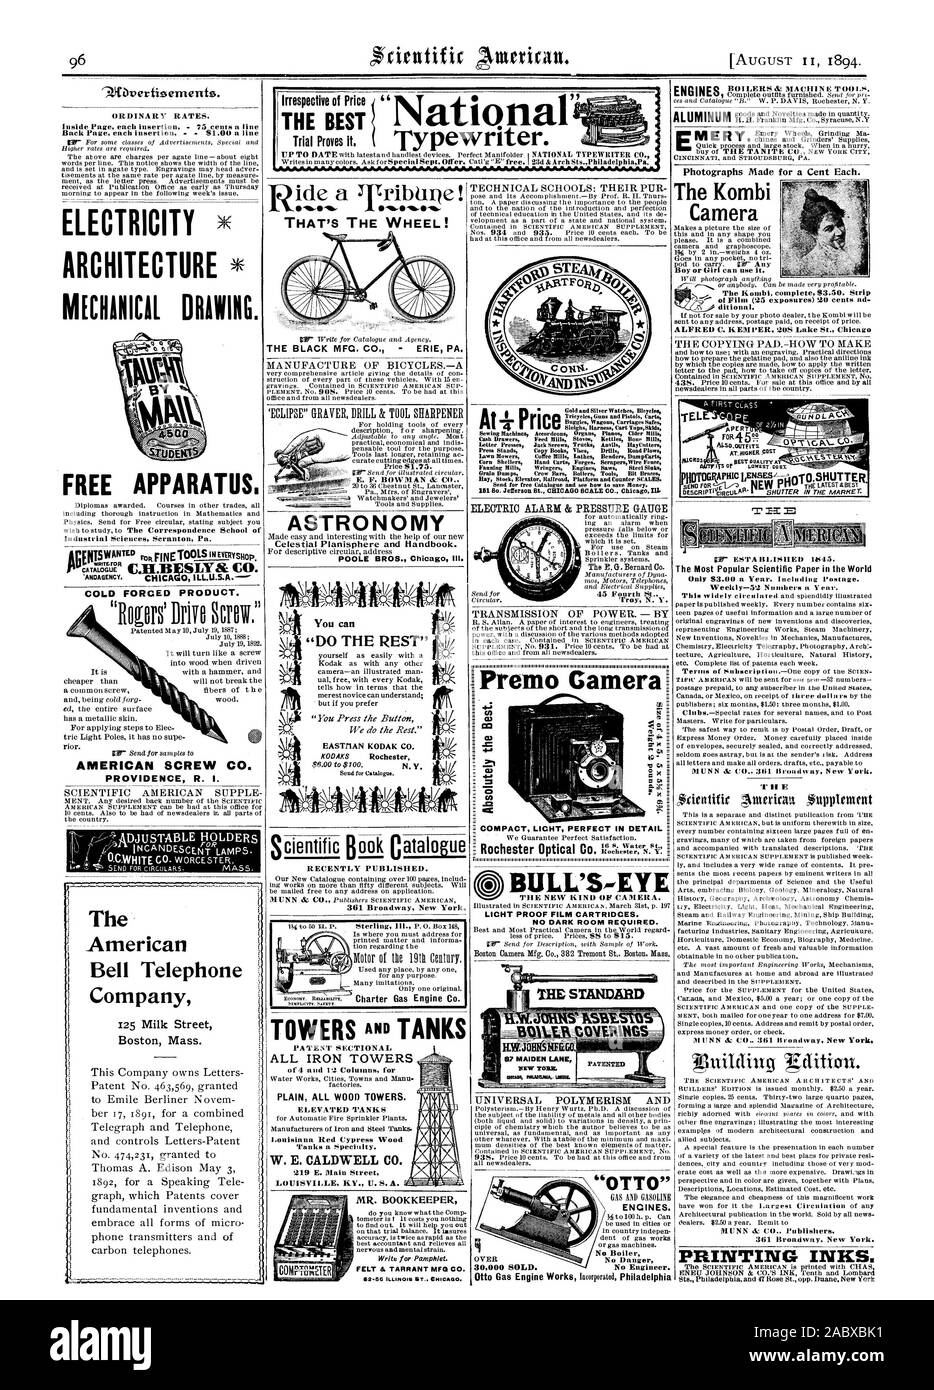 ELECTRICITY NE ARCHITECTURE MECHANICAL DRAWING. FREE APPARATUS. The American Bell Telephone Company Industrial Sciences Scranton Pa. ILL.U.S.A COLD FORGED PRODUCT. AMERICAN SCREW CO. PROVIDENCE R. I. MANUFACTURE OF BICYCLESA 1  vb. lb THAT'S THE WHEEL! THE BLACK MFG. CO. - ERIE PA. 'ECLIPSE' GRAYER DRILL & TOOL SHARPENER sq:0 E. F. BOWMAN diz. CO ASTRONOMY Viiiktk You can RECENTLY PUBLISHED. 361 Broadway New York. ALL IRON TOWERS PATENT SECTIONAL ELEVATED TANKS PlAPFI Tanks a Specialty. 219 E. Main Street W. E. CALDWELL CO. LOUISVILLE KY. U. S.A. FELT & TARRANT MFG CO. 62.56 ILLINOIS ST Stock Photo